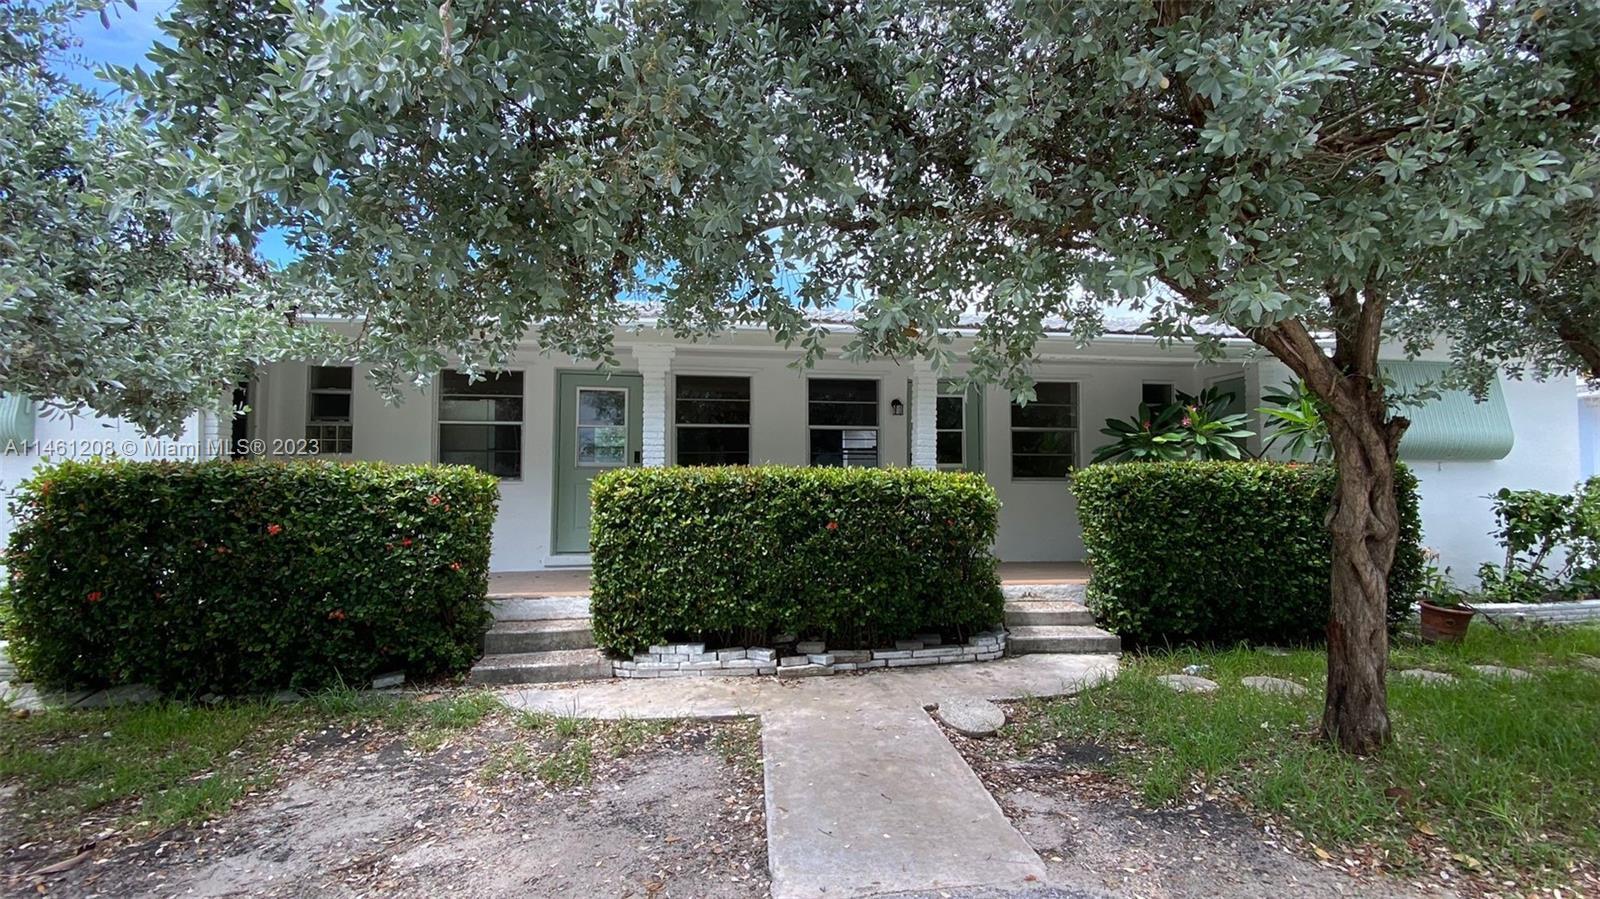 Rare opportunity to purchase a completely renovated fourplex in Hollywood beach. walking distance to